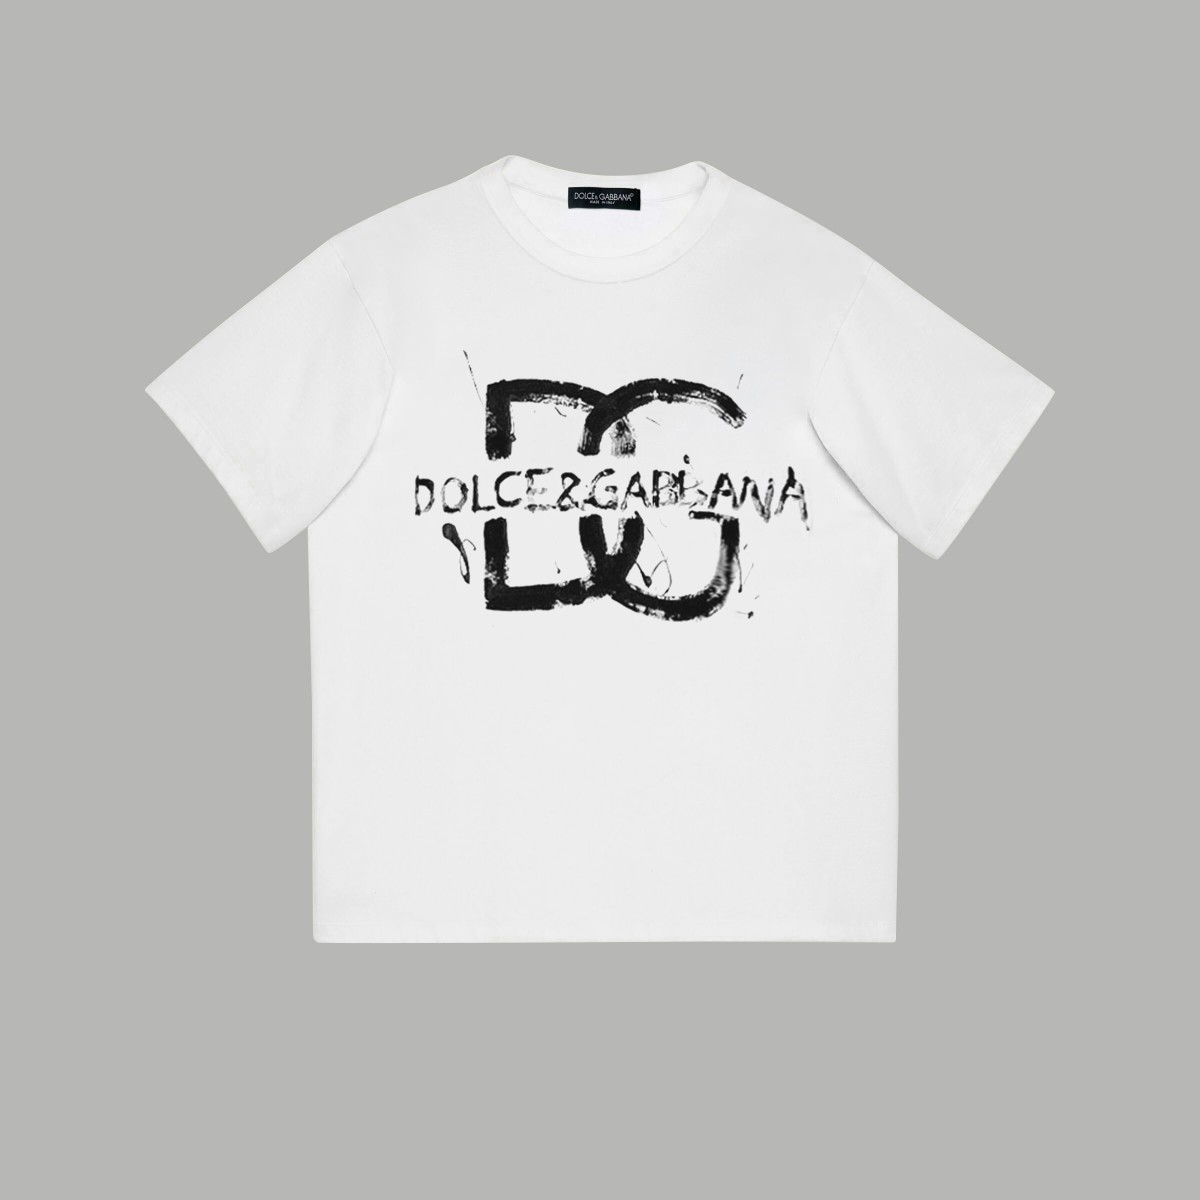 Dolce & Gabbana Clothing T-Shirt Printing Unisex Cotton Spring/Summer Collection Short Sleeve